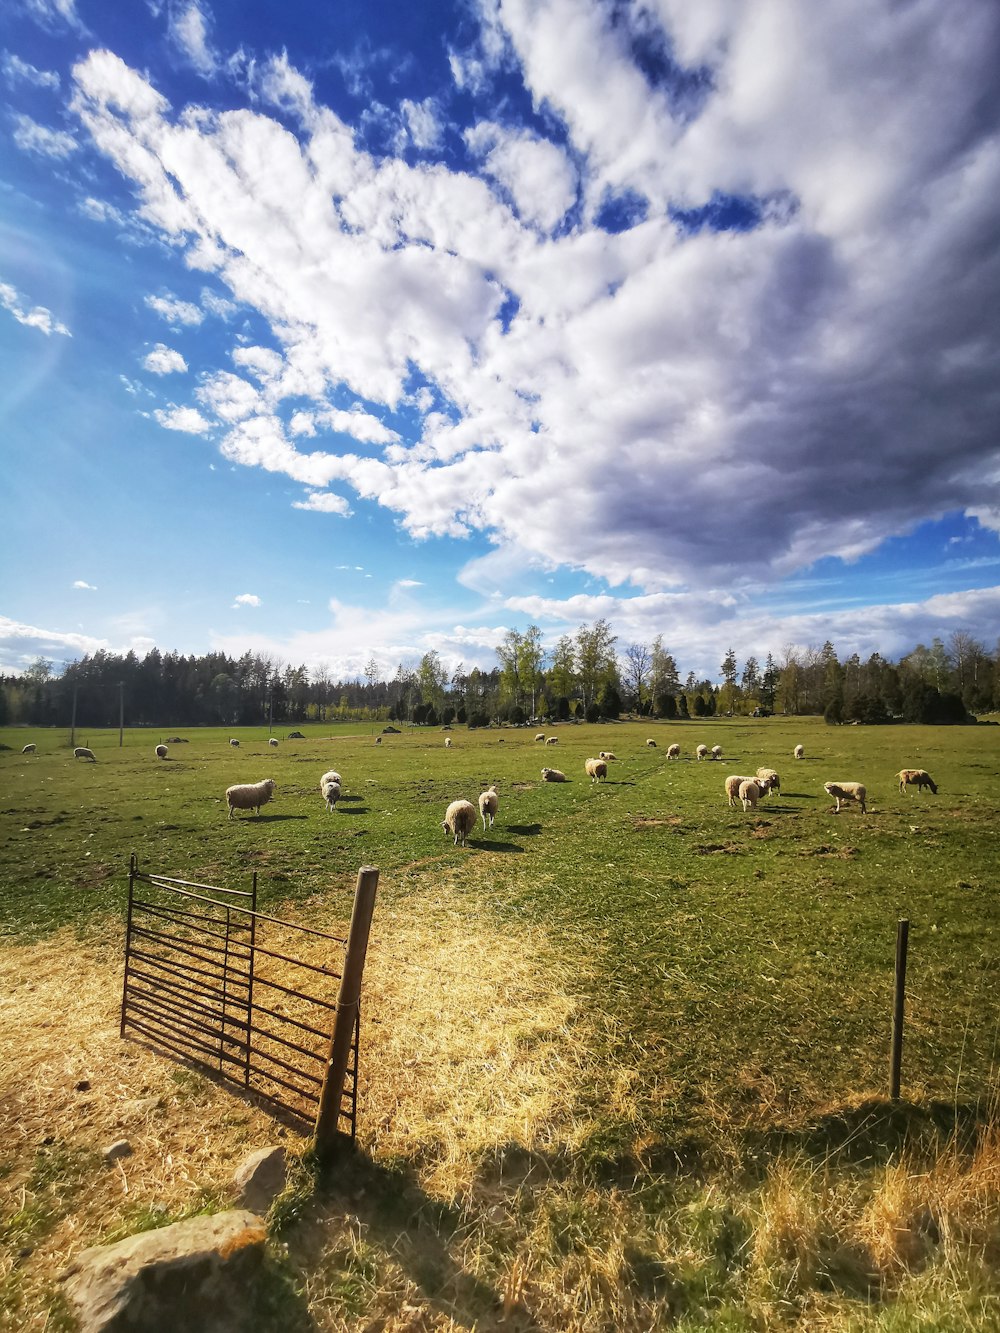 white sheep on green grass field under blue sky during daytime